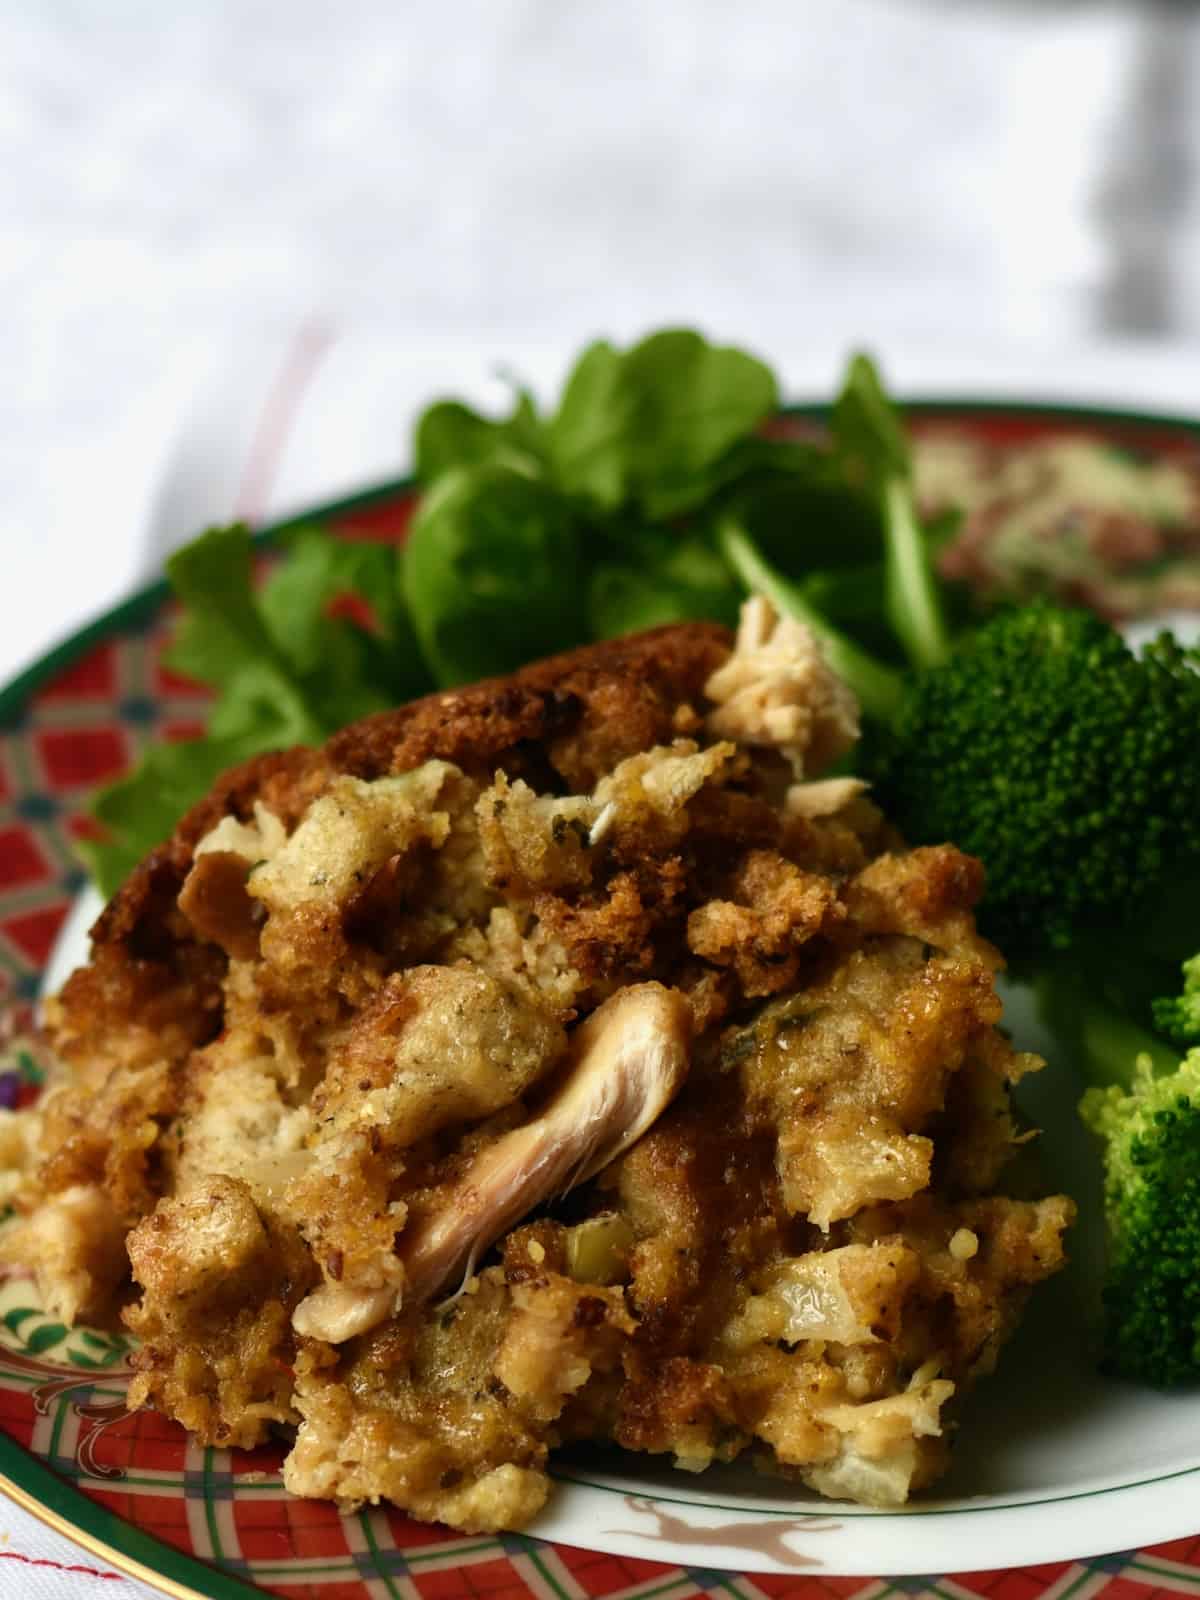 Serving of chicken cornbread dressing on plate with broccoli and salad.